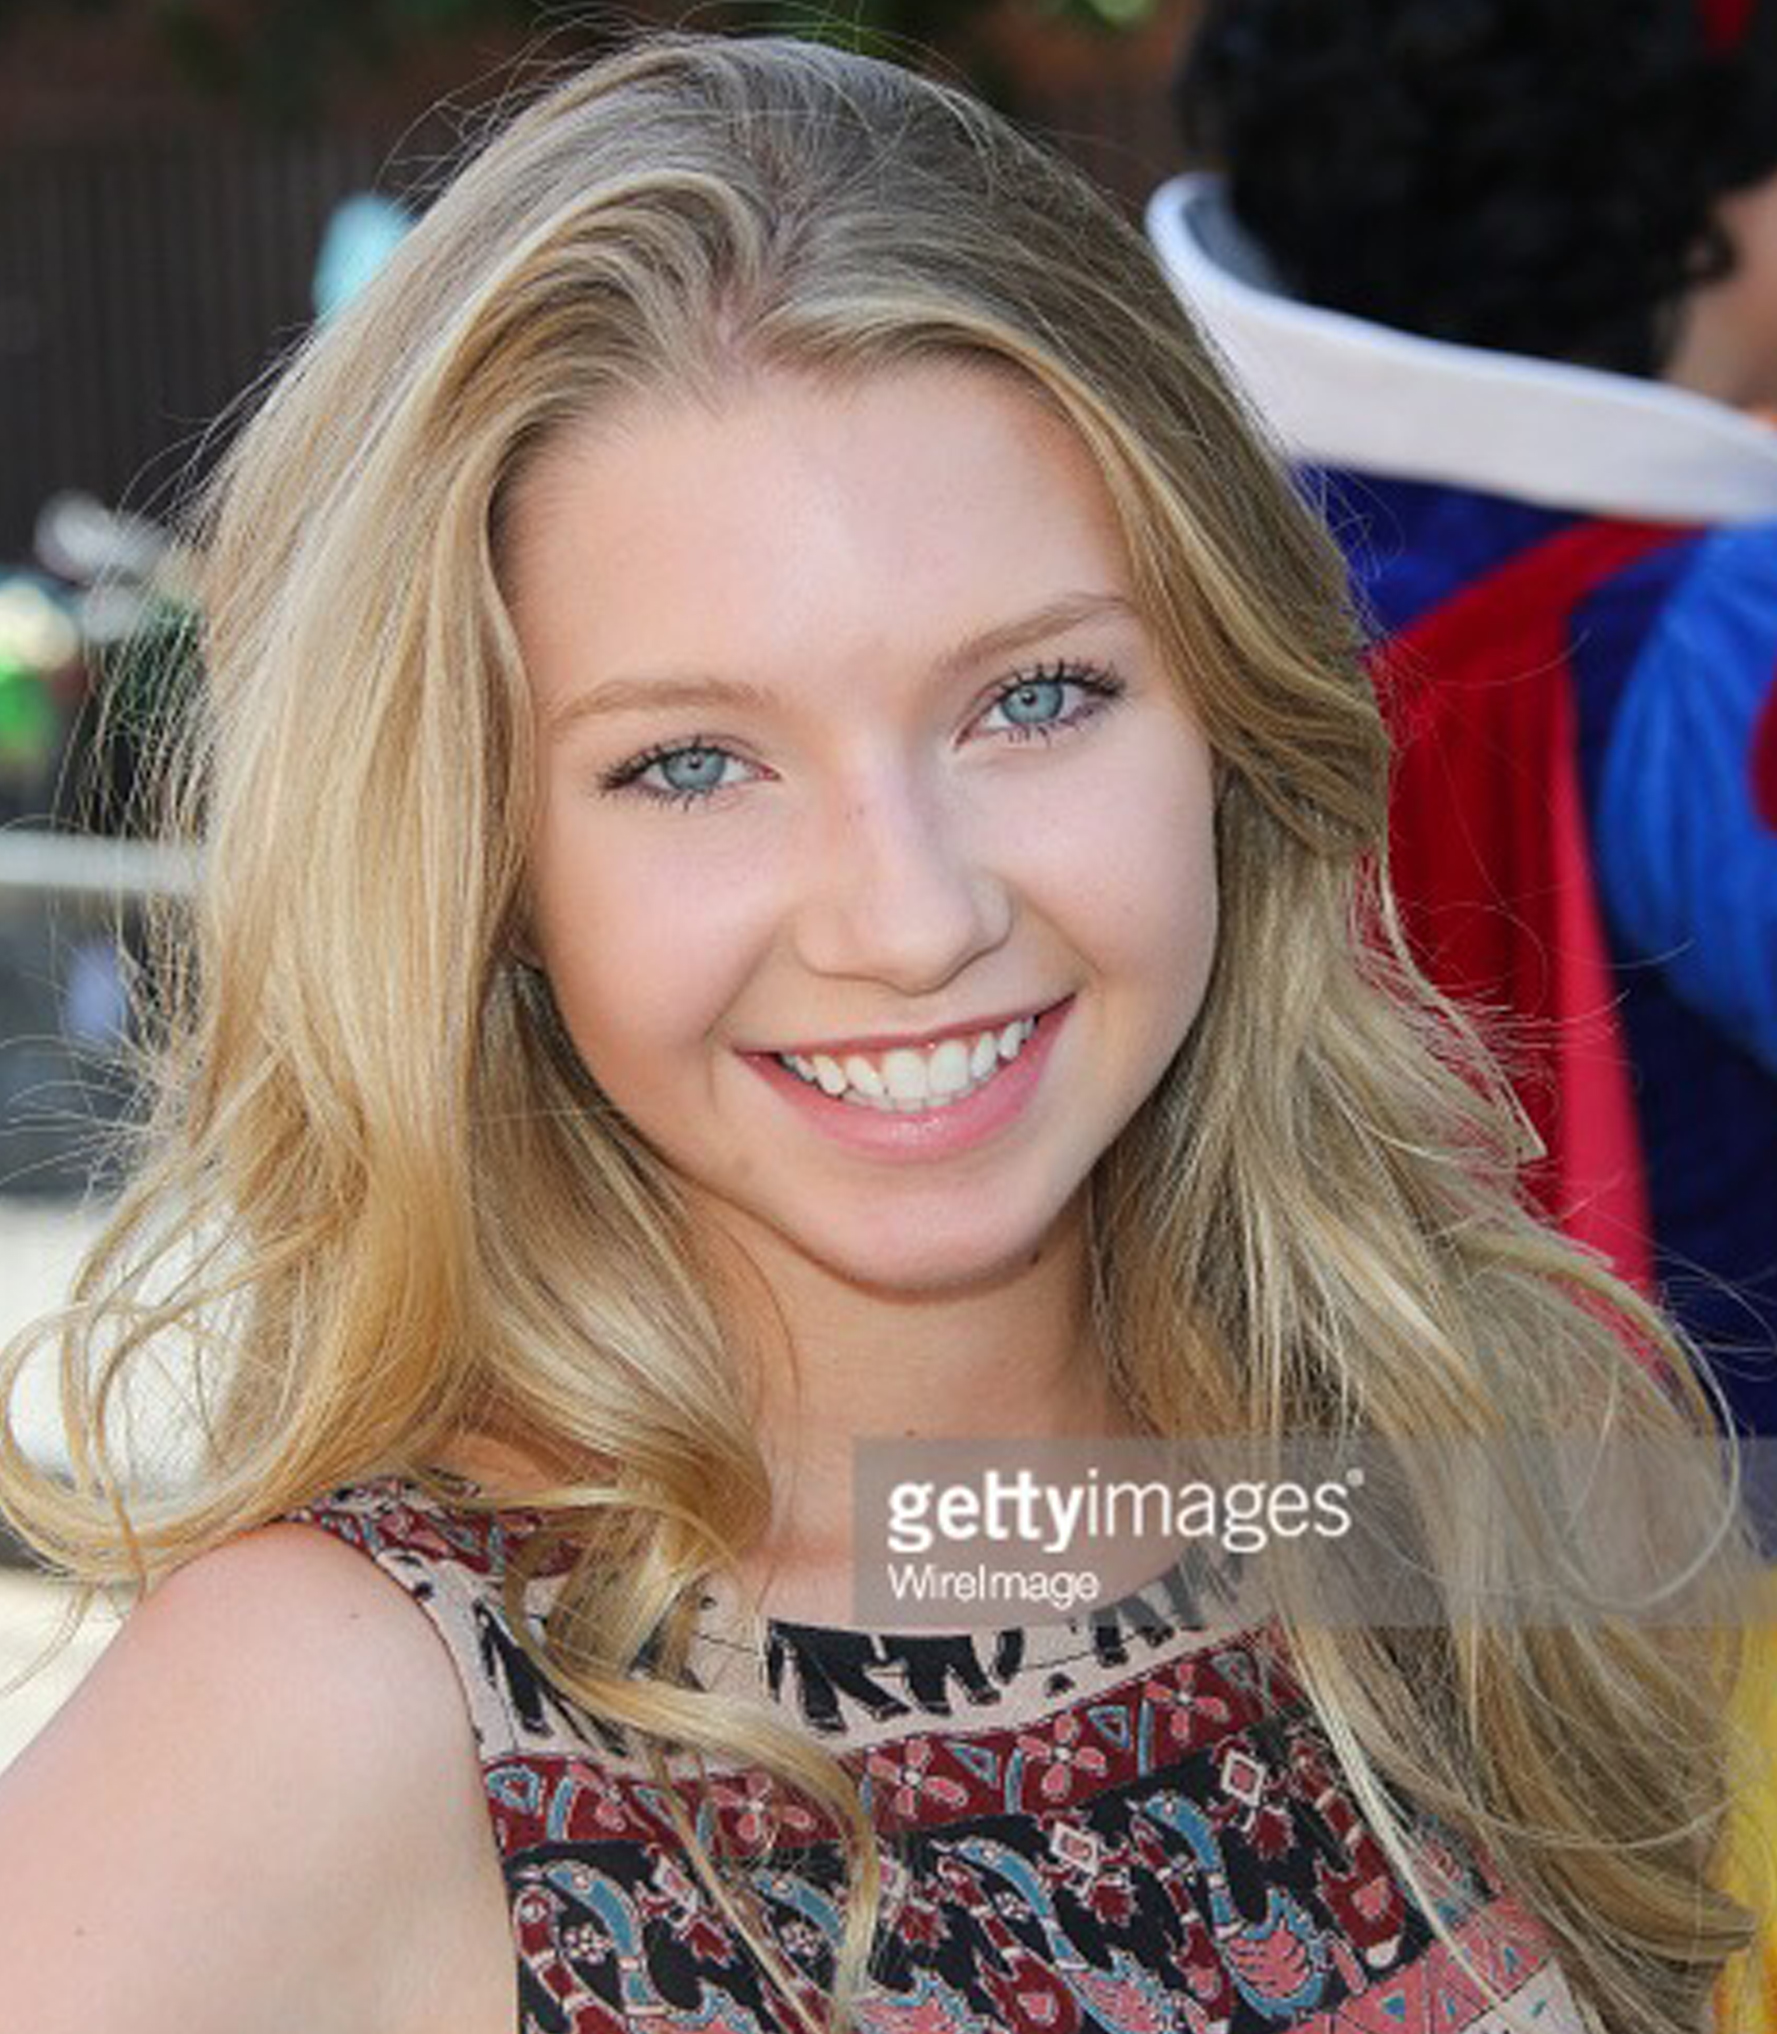 LOS ANGELES, CA - AUGUST 08: Actress Elise Luthman attends the Los Angeles Mission's End Of Summer Block Party: Time To Enjoy Being A Kid at Los Angeles Mission on August 8, 2015 in Los Angeles, California.